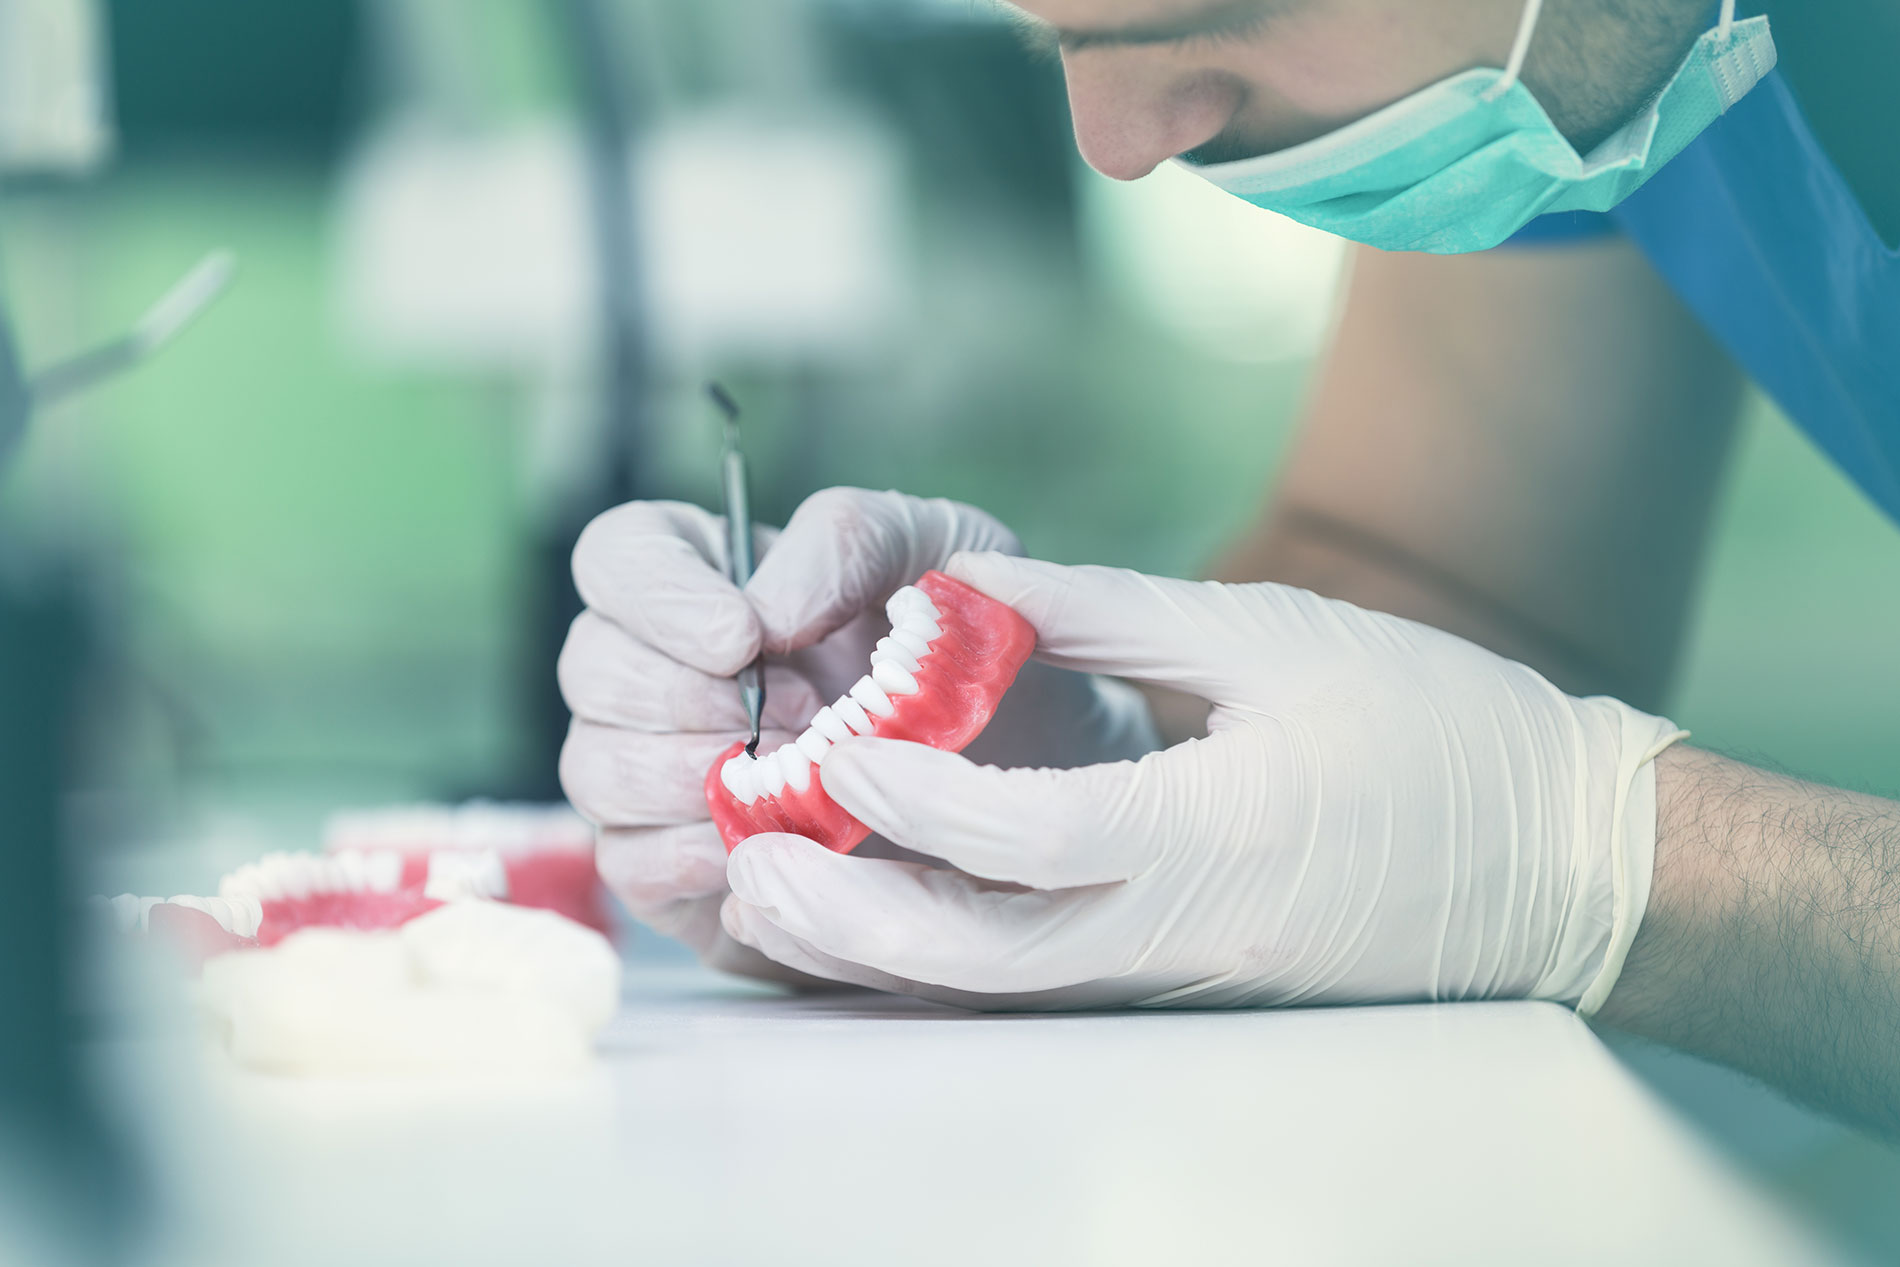 The hands of a denture technician making adjustments to a partial denture with dental pick